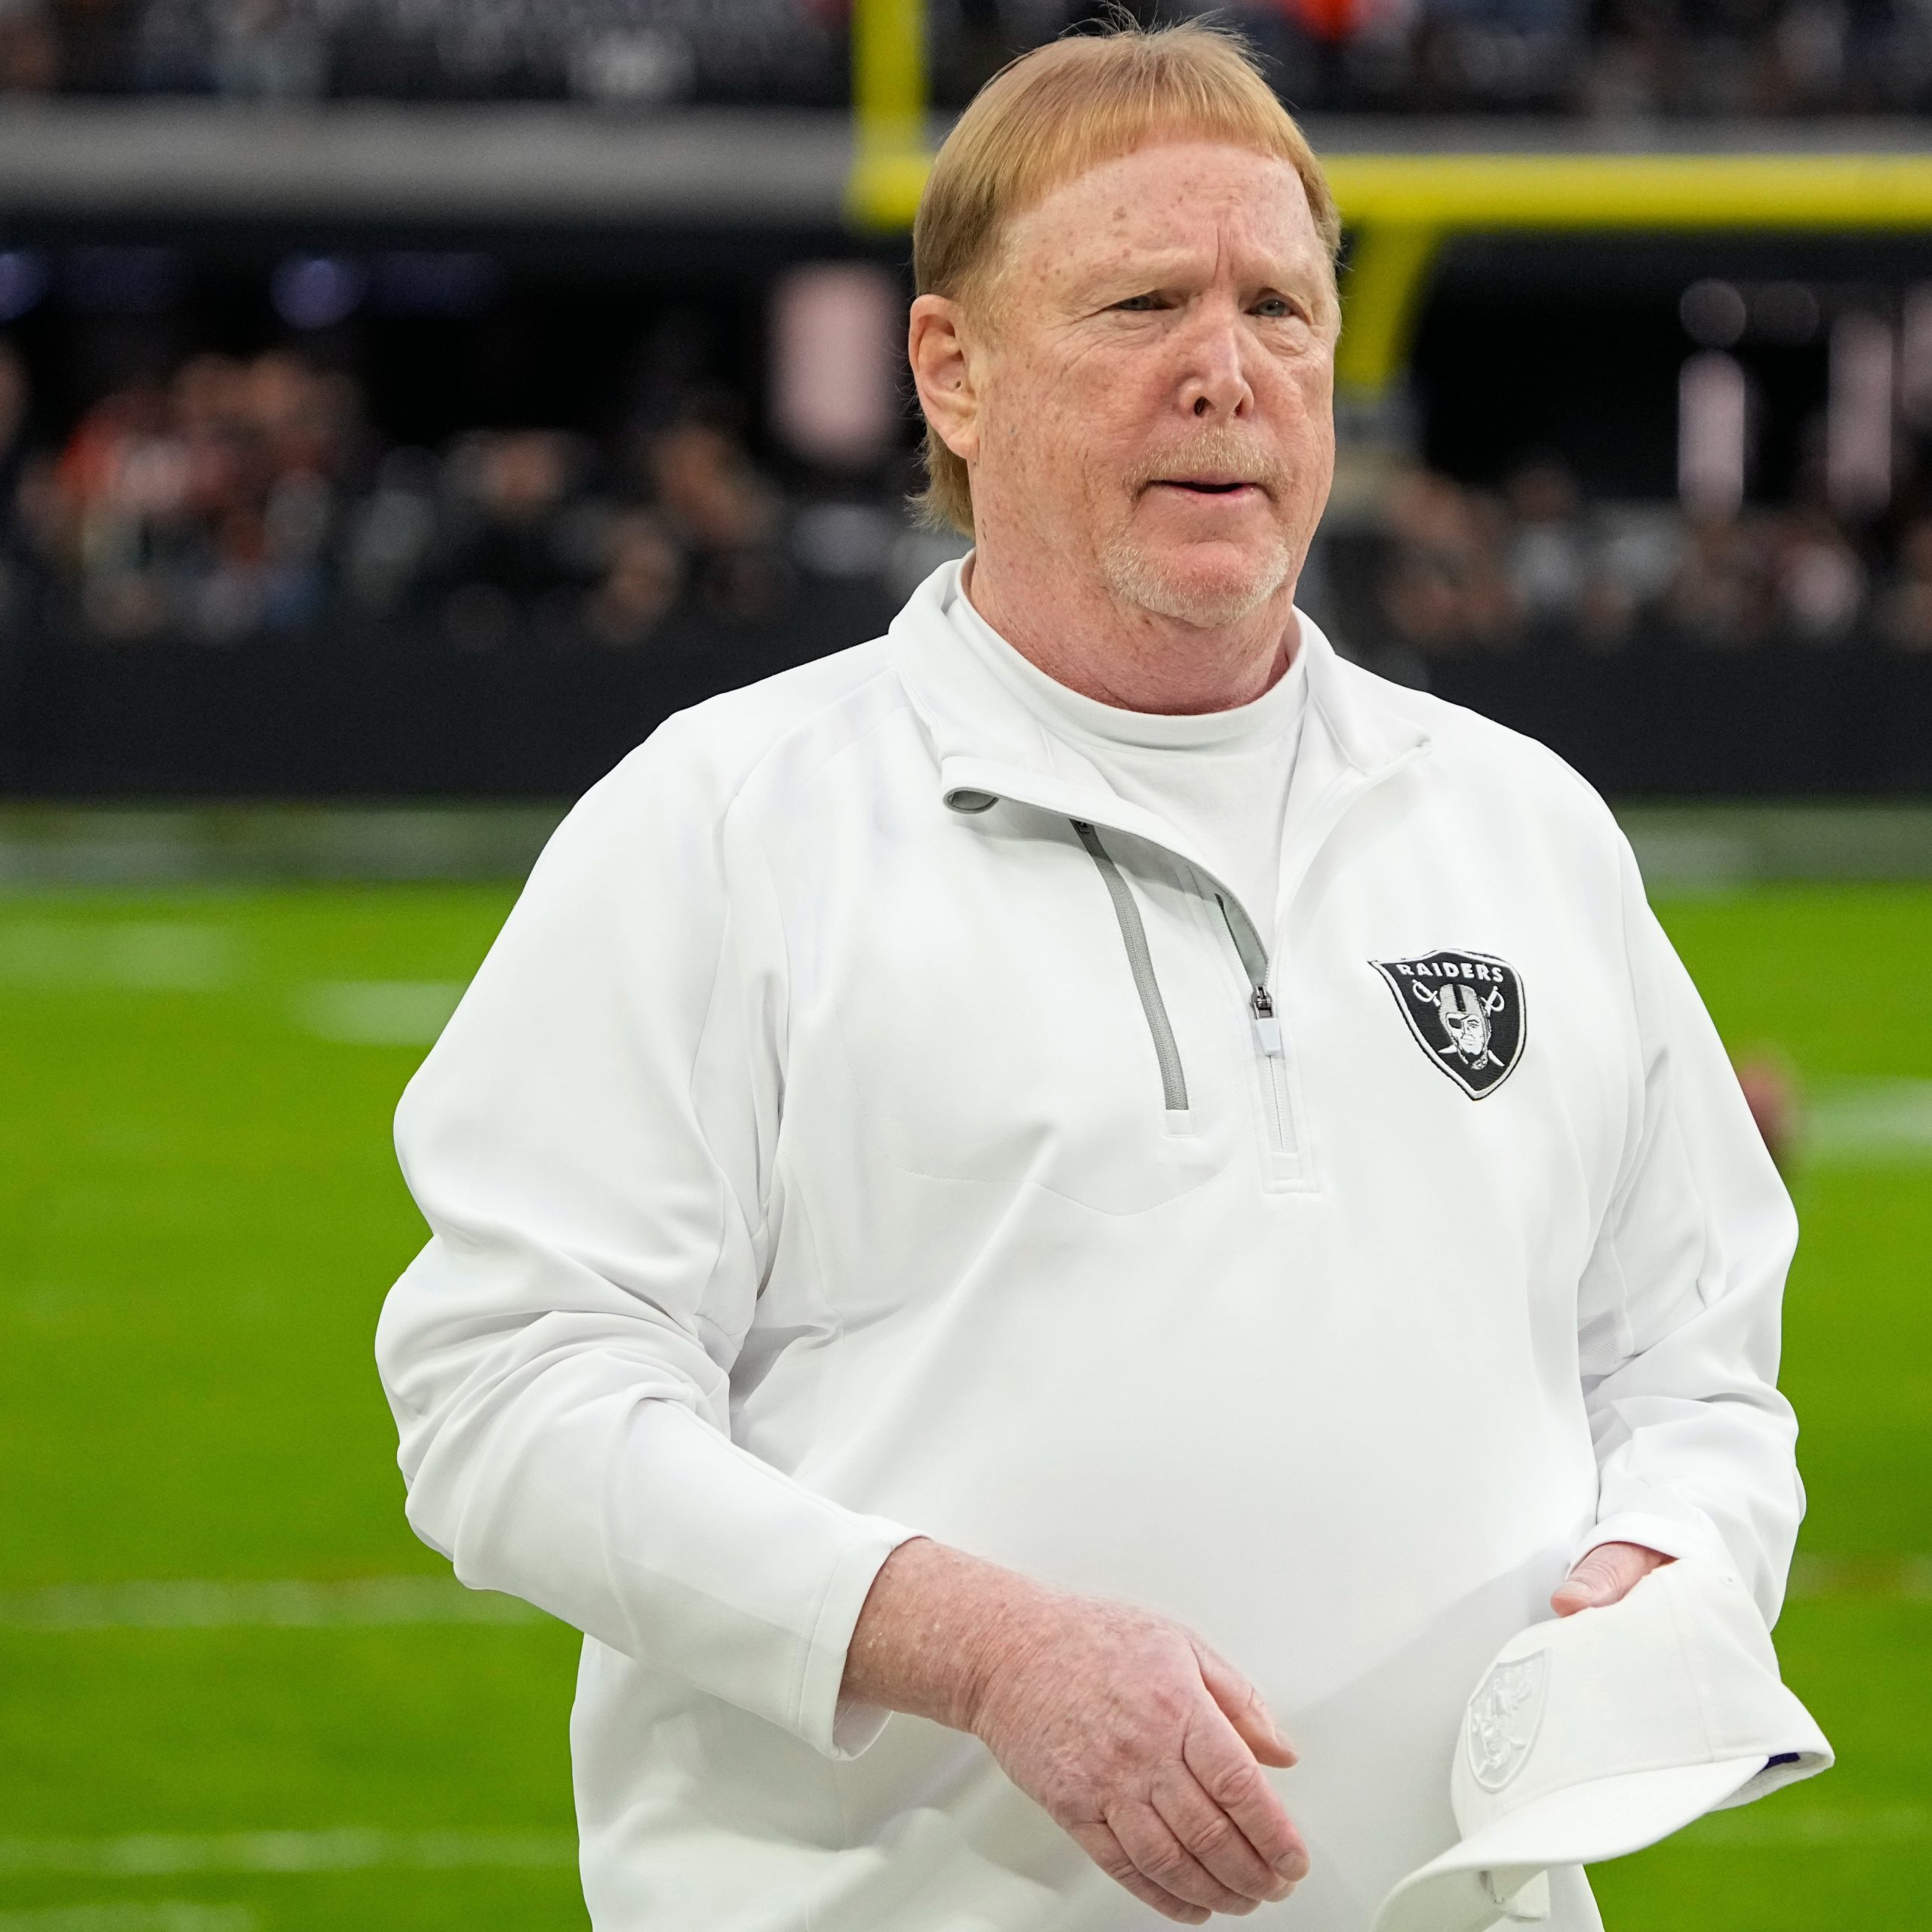 After the Uvalde School Shooting, Raiders Owner Mark Davis Donates $1 Million to The School District